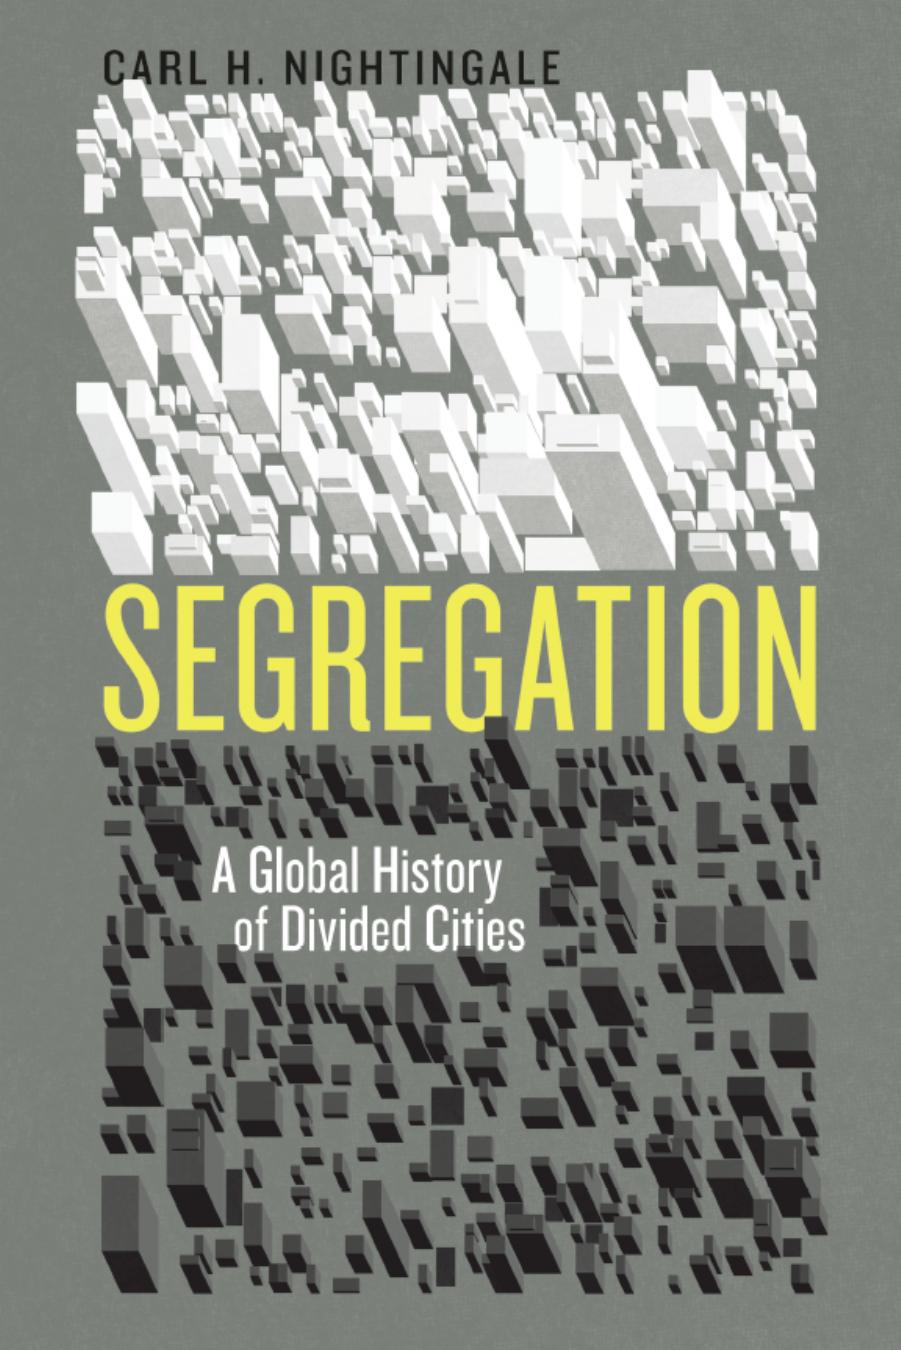 Segregation: A Global History of Divided Cities by Carl H. Nightingale